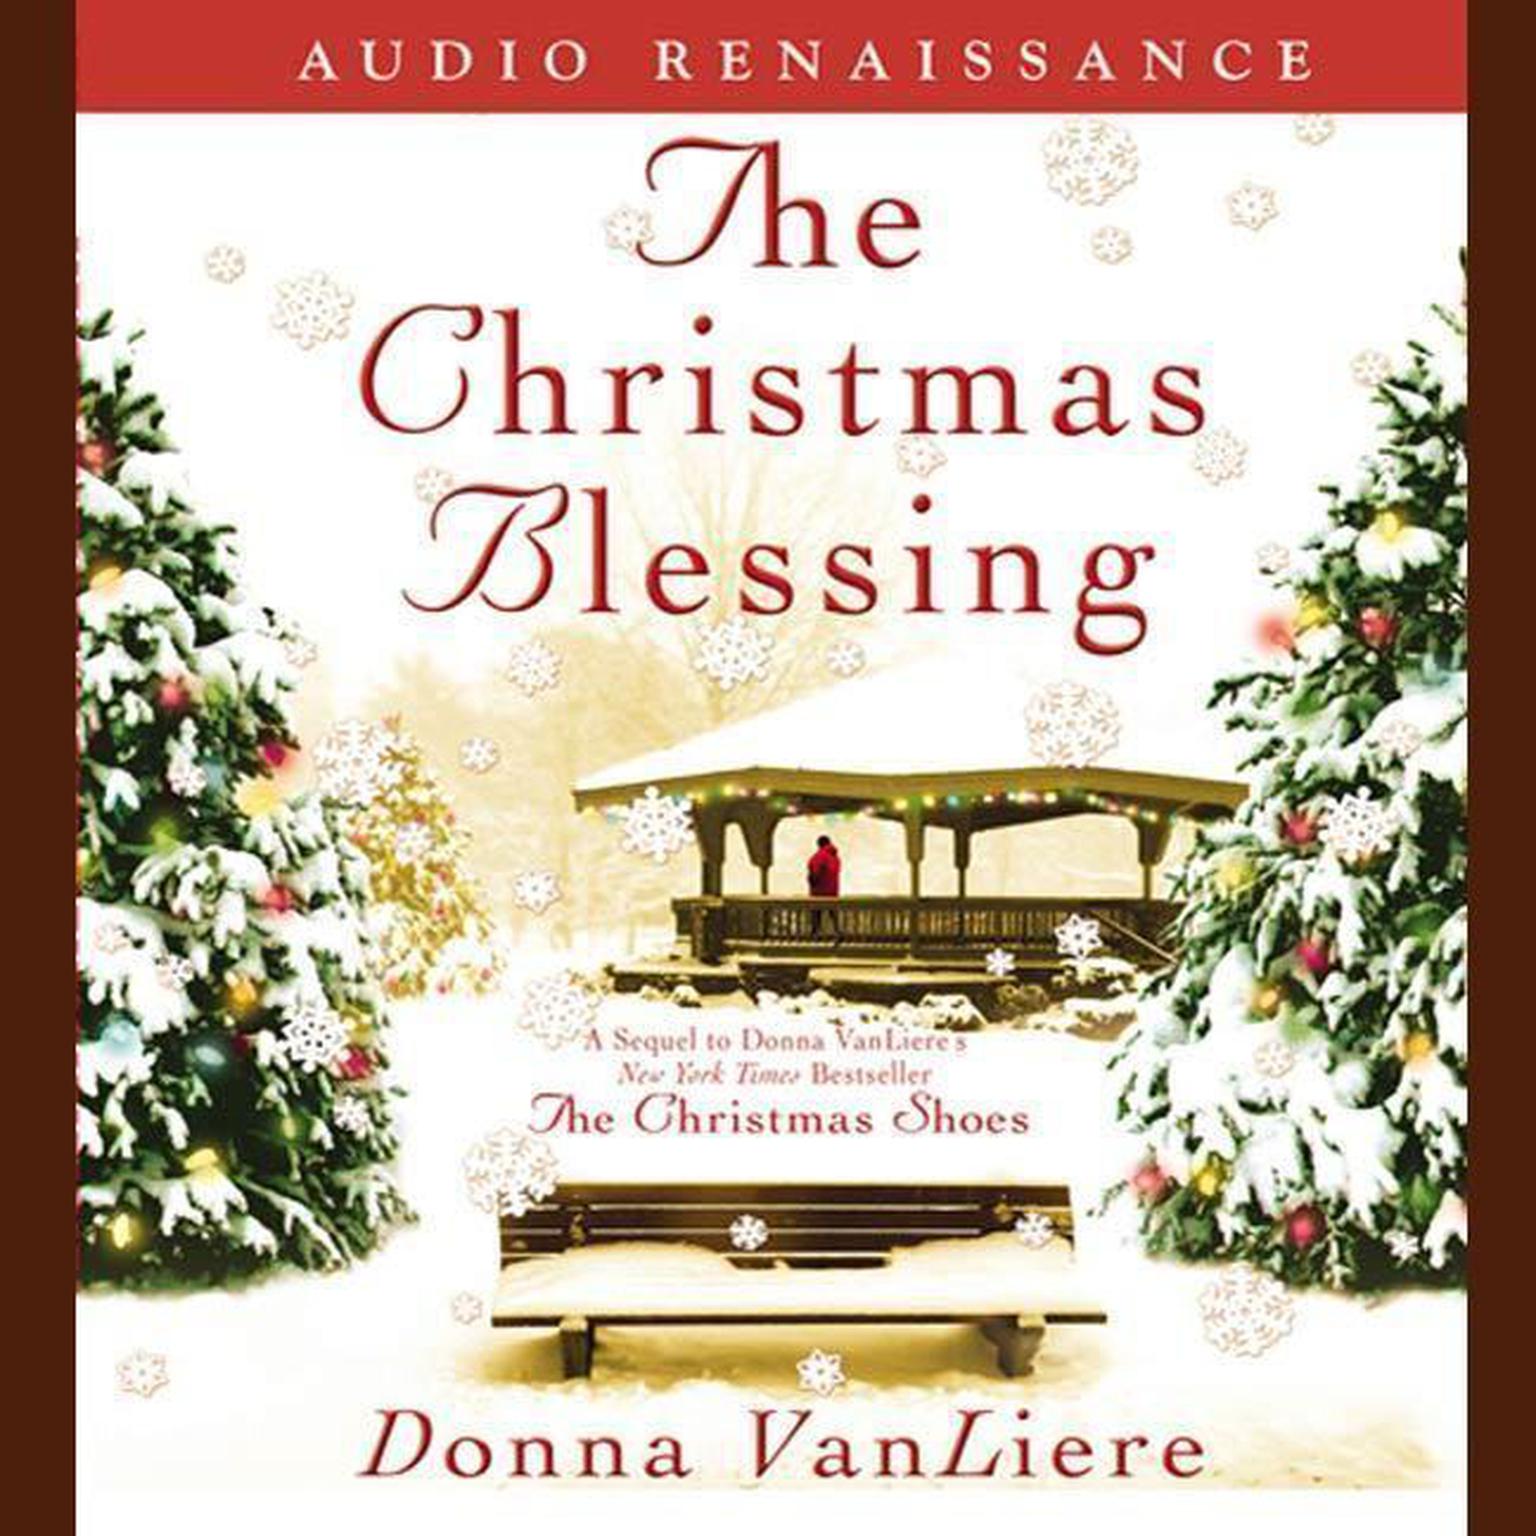 The Christmas Blessing (Abridged): A Novel Audiobook, by Donna VanLiere